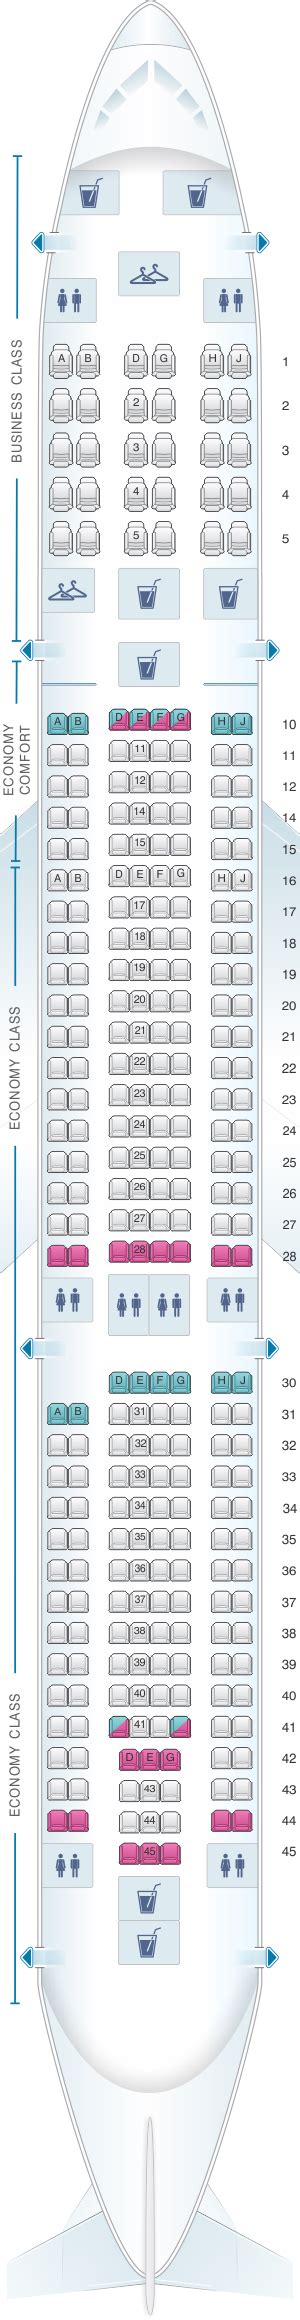 Airbus A Layout Seats Background Airbus Way Hot Sex Picture